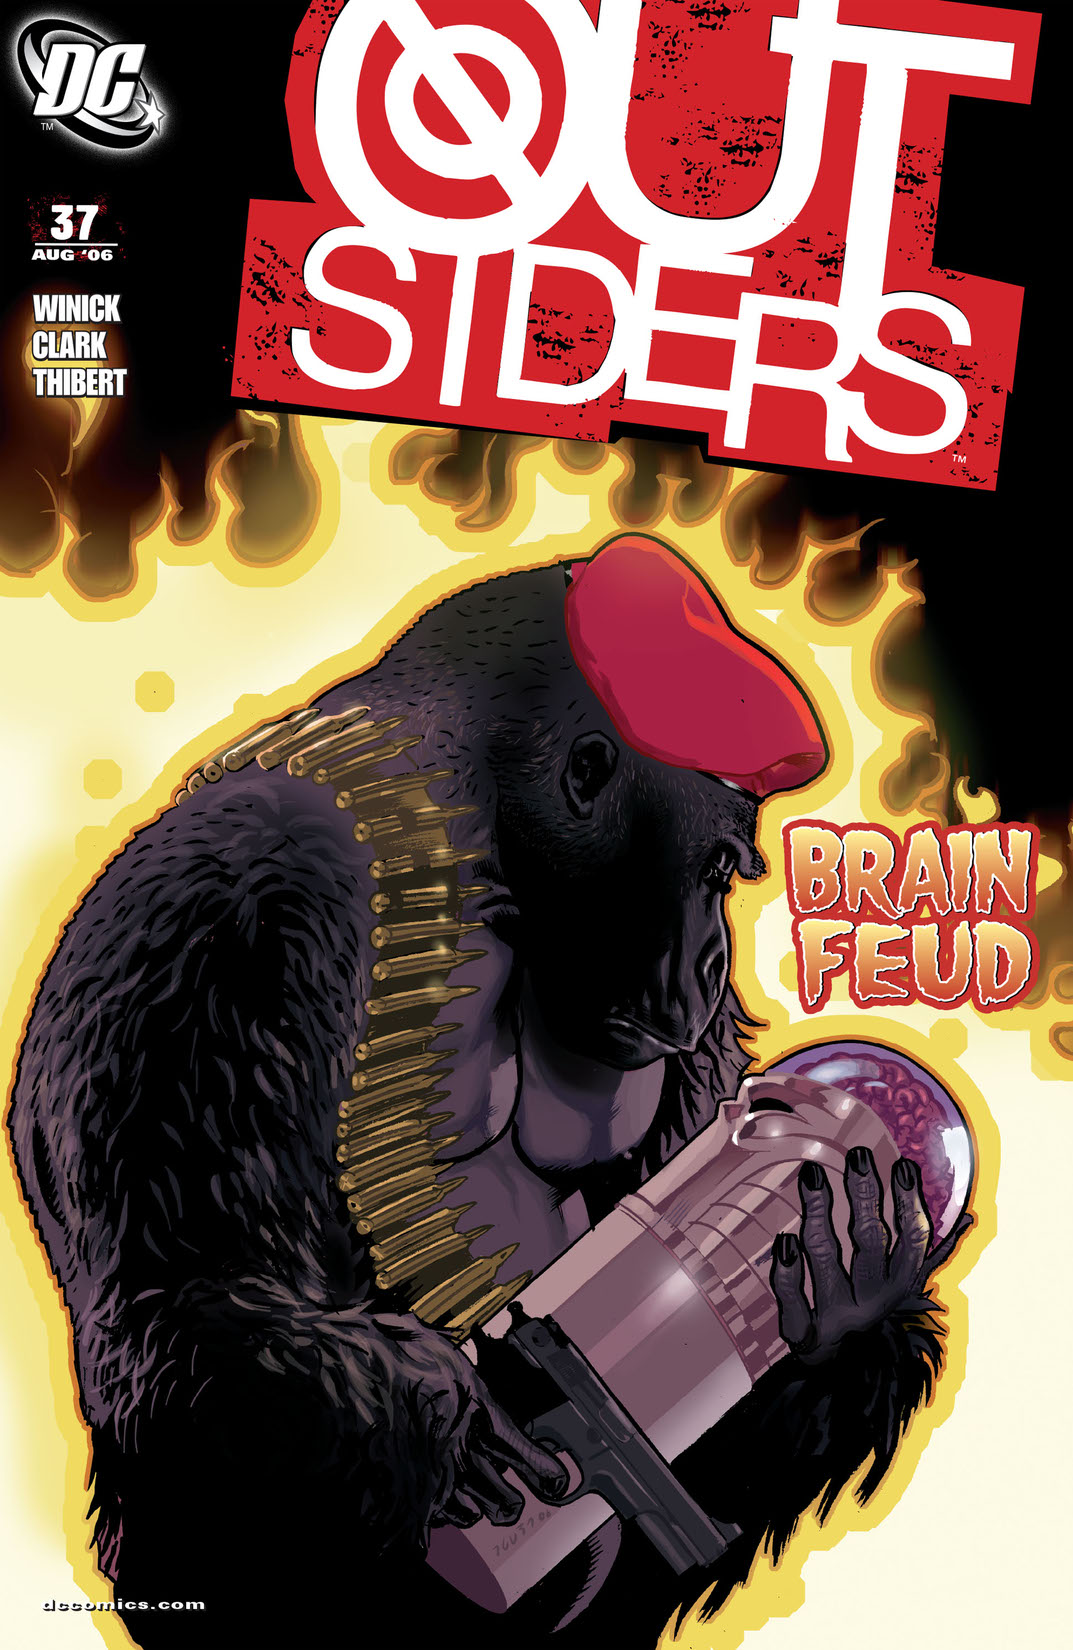 Outsiders (2003-) #37 preview images